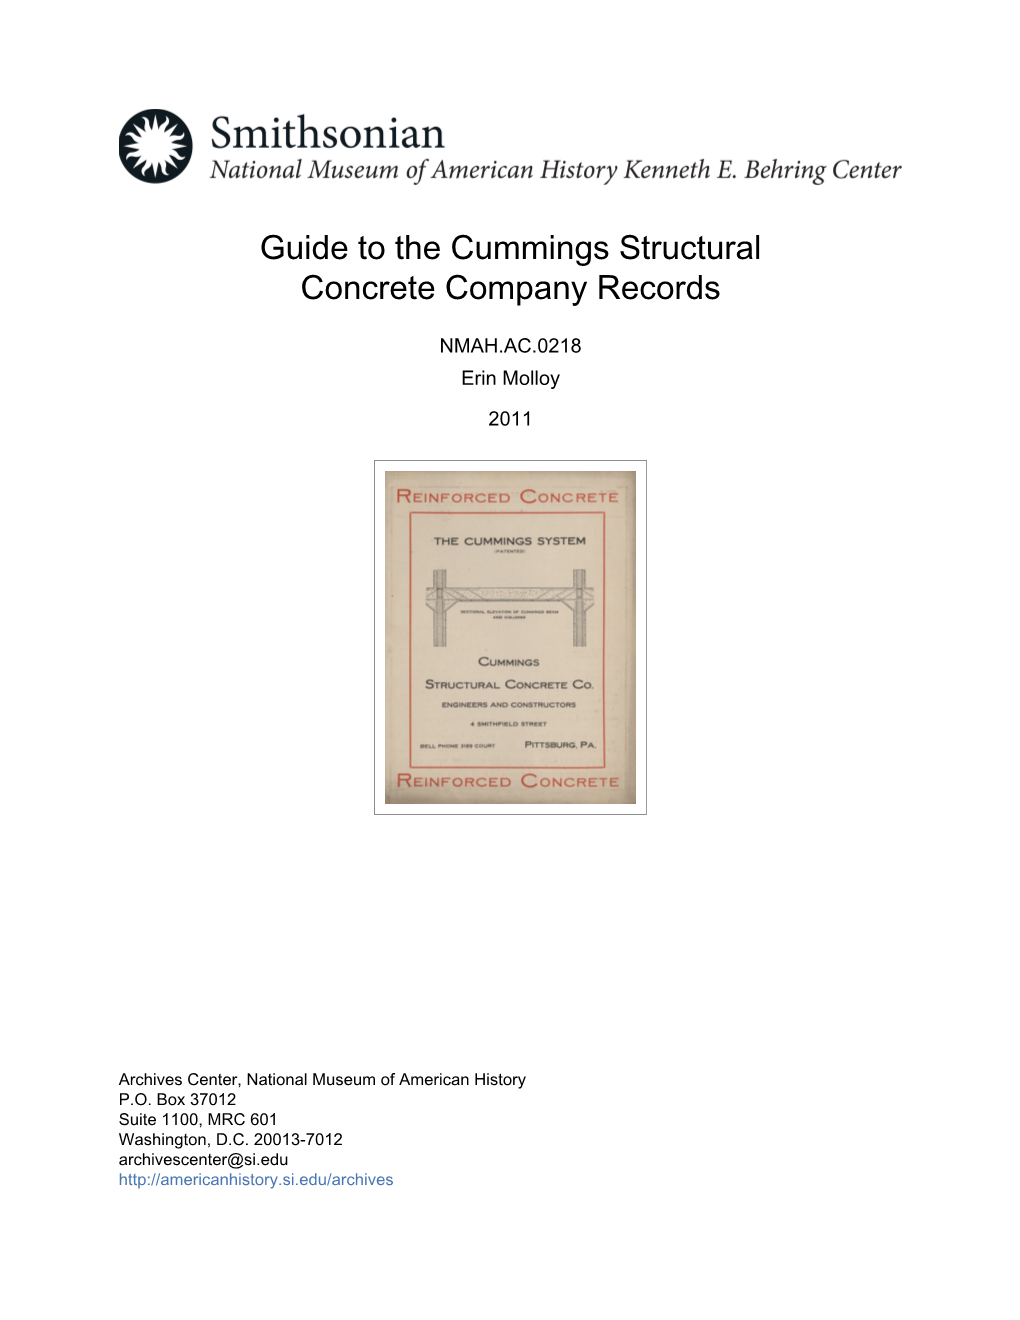 Guide to the Cummings Structural Concrete Company Records